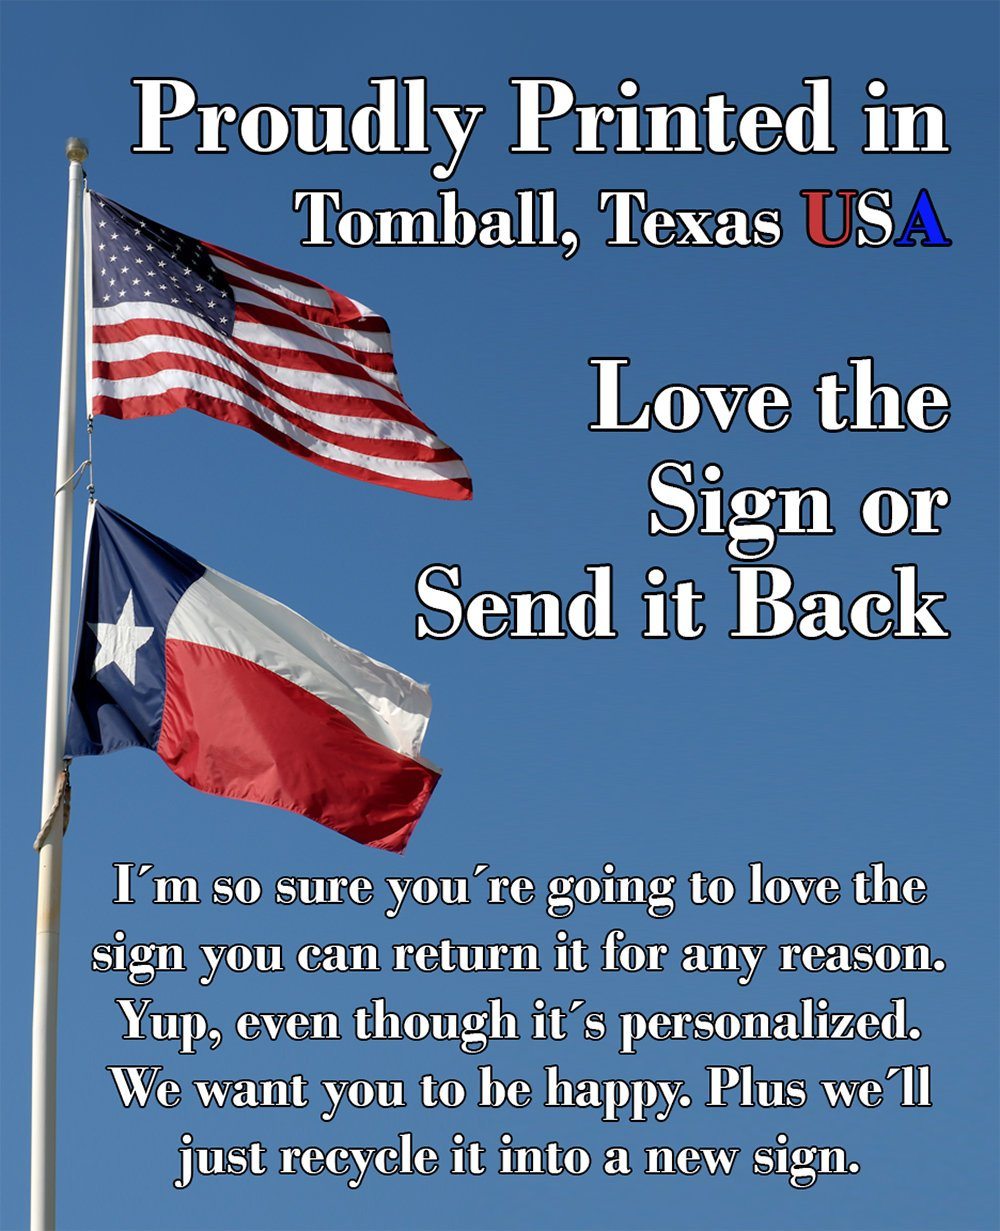 Personalized - Pastor - Metal Sign | Lone Star Art.